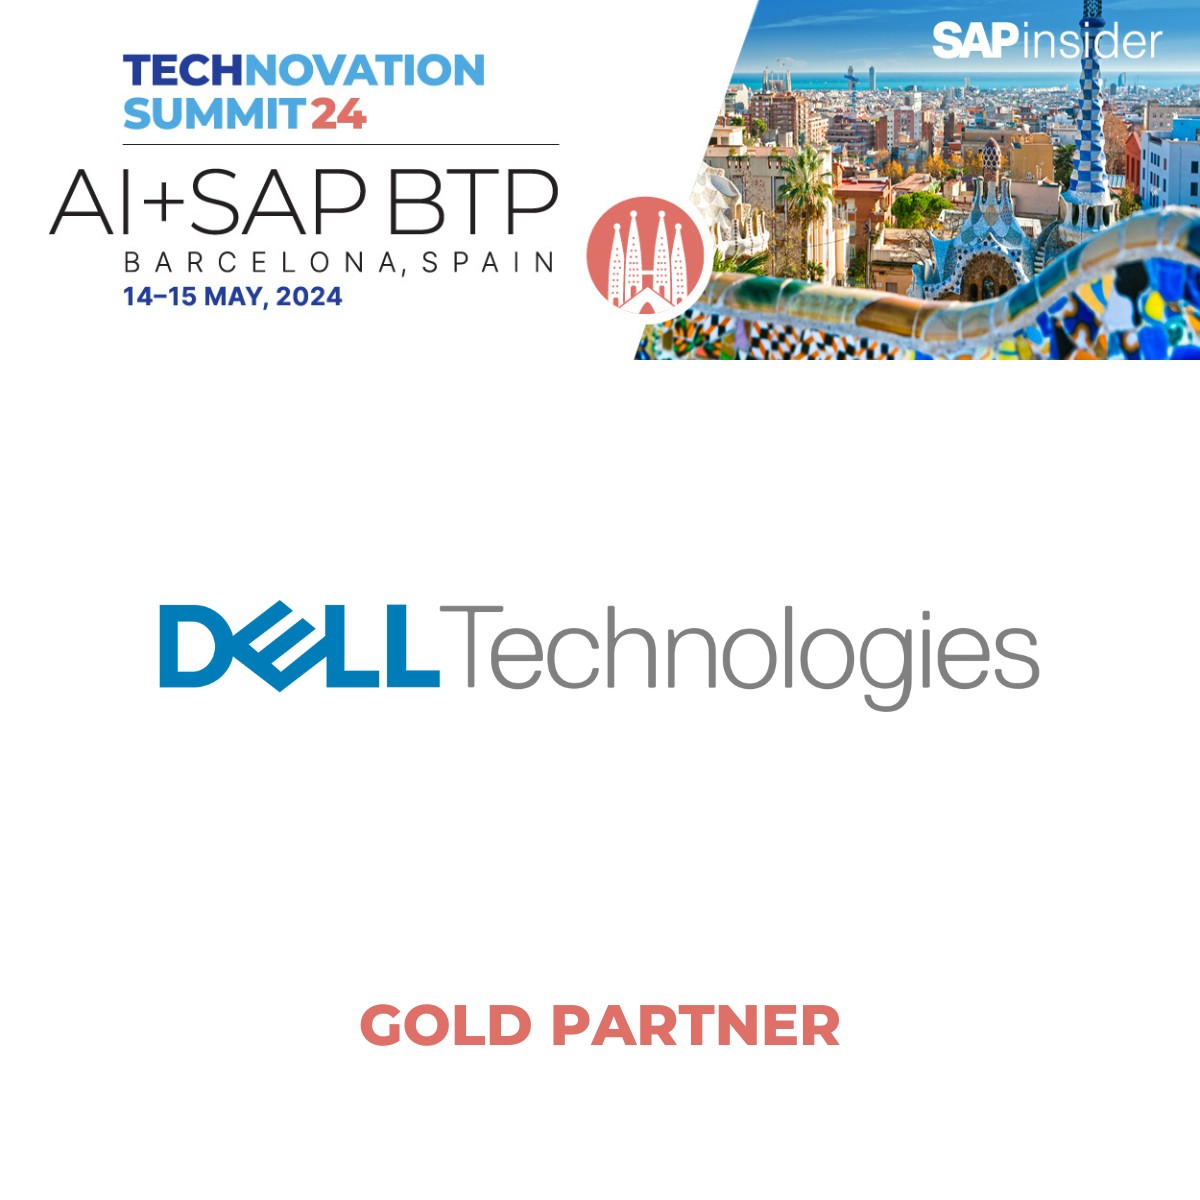 We’re excited to share that we'll be at the @SAPinsider SAPinsider AI+SAP BTP Summit in Barcelona on May 14-15 at the Renaissance Barcelona Fira!
dell.to/49wFAVZ
#BuildingTechAlliances #AI+SAPBTPSummit24 #SAPinsider #SAPAI #Iwork4dell
 #iwork4dell